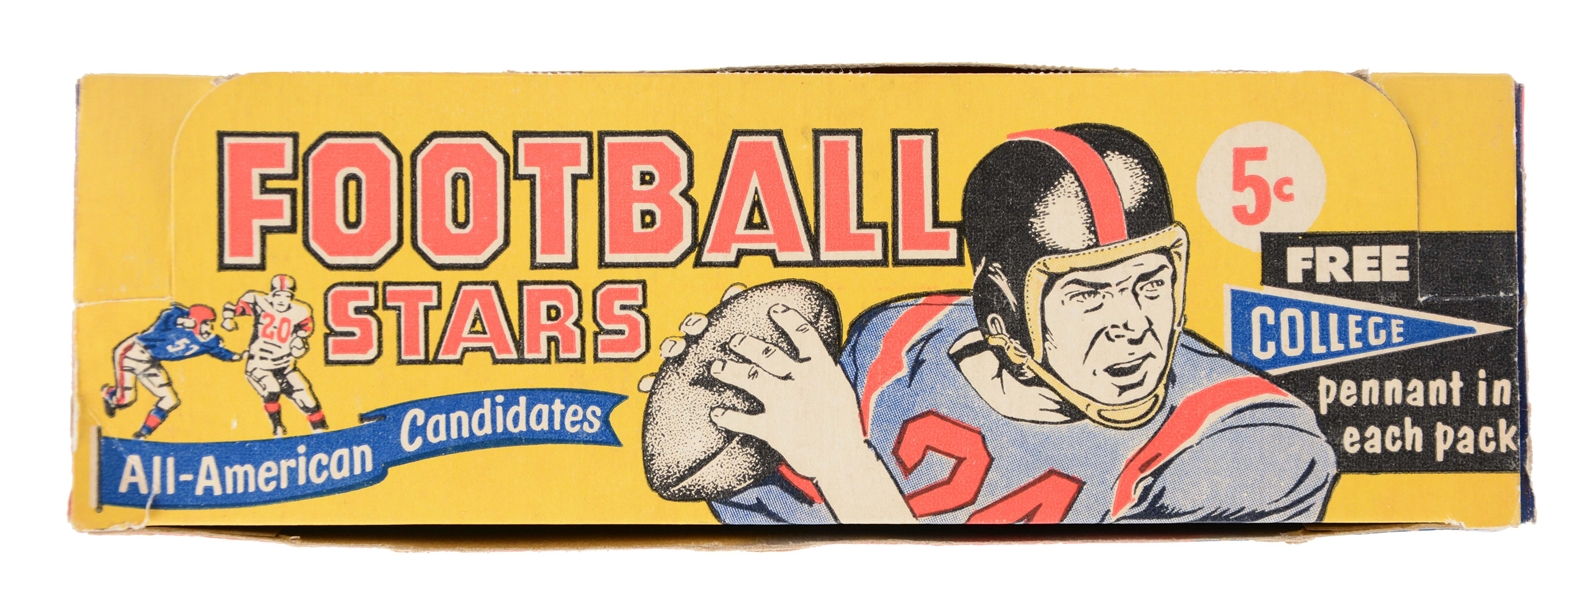 1961 NU CARD SCOOPS UNOPENED FOOTBALL BOX.